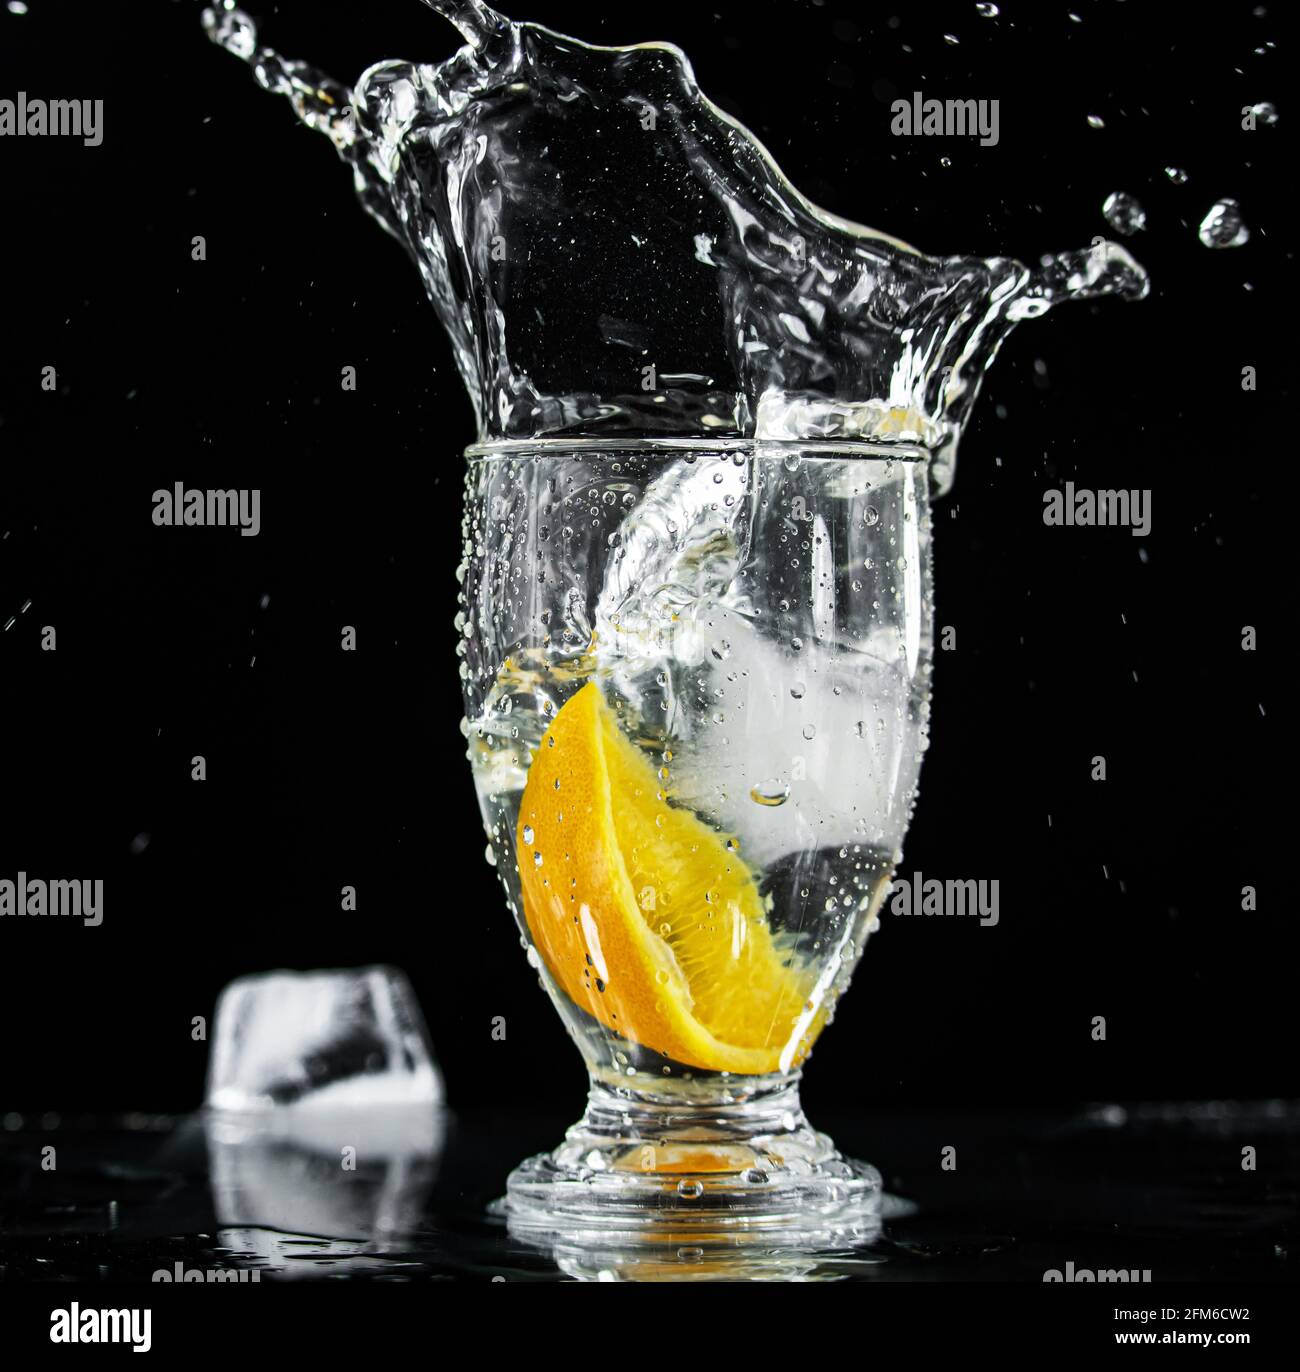 Glass of Water with Orange Slice and Ice Drop Causing Water Splash on a Black Background with an Ice Cube Lying Nearby Stock Photo